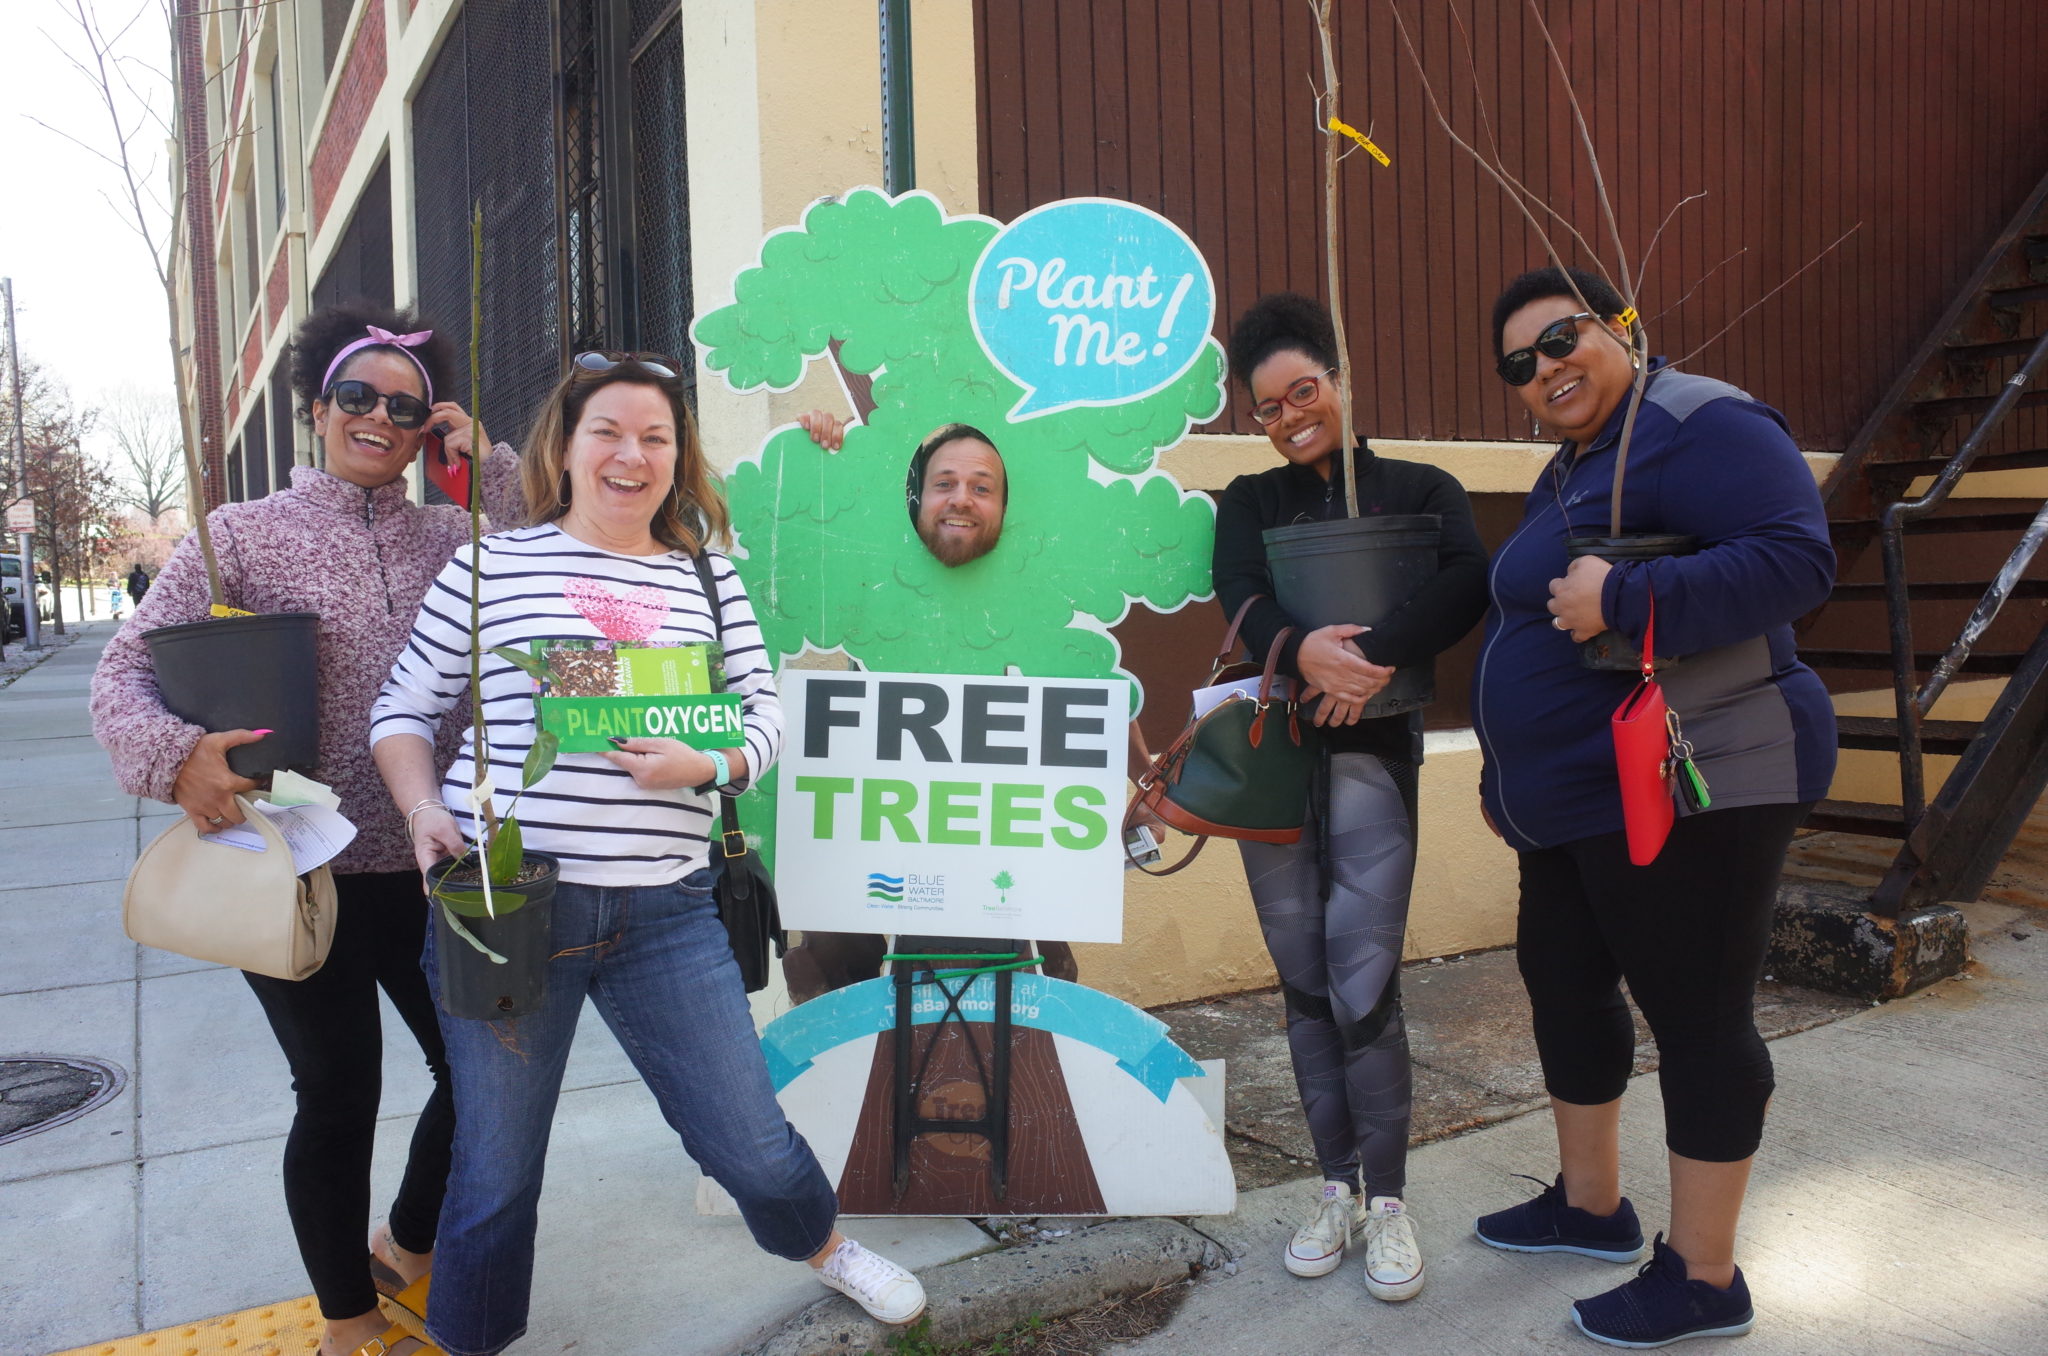 Image from Blue Water Baltimore's Website for their Tree Giveaway. Five people posing with a 